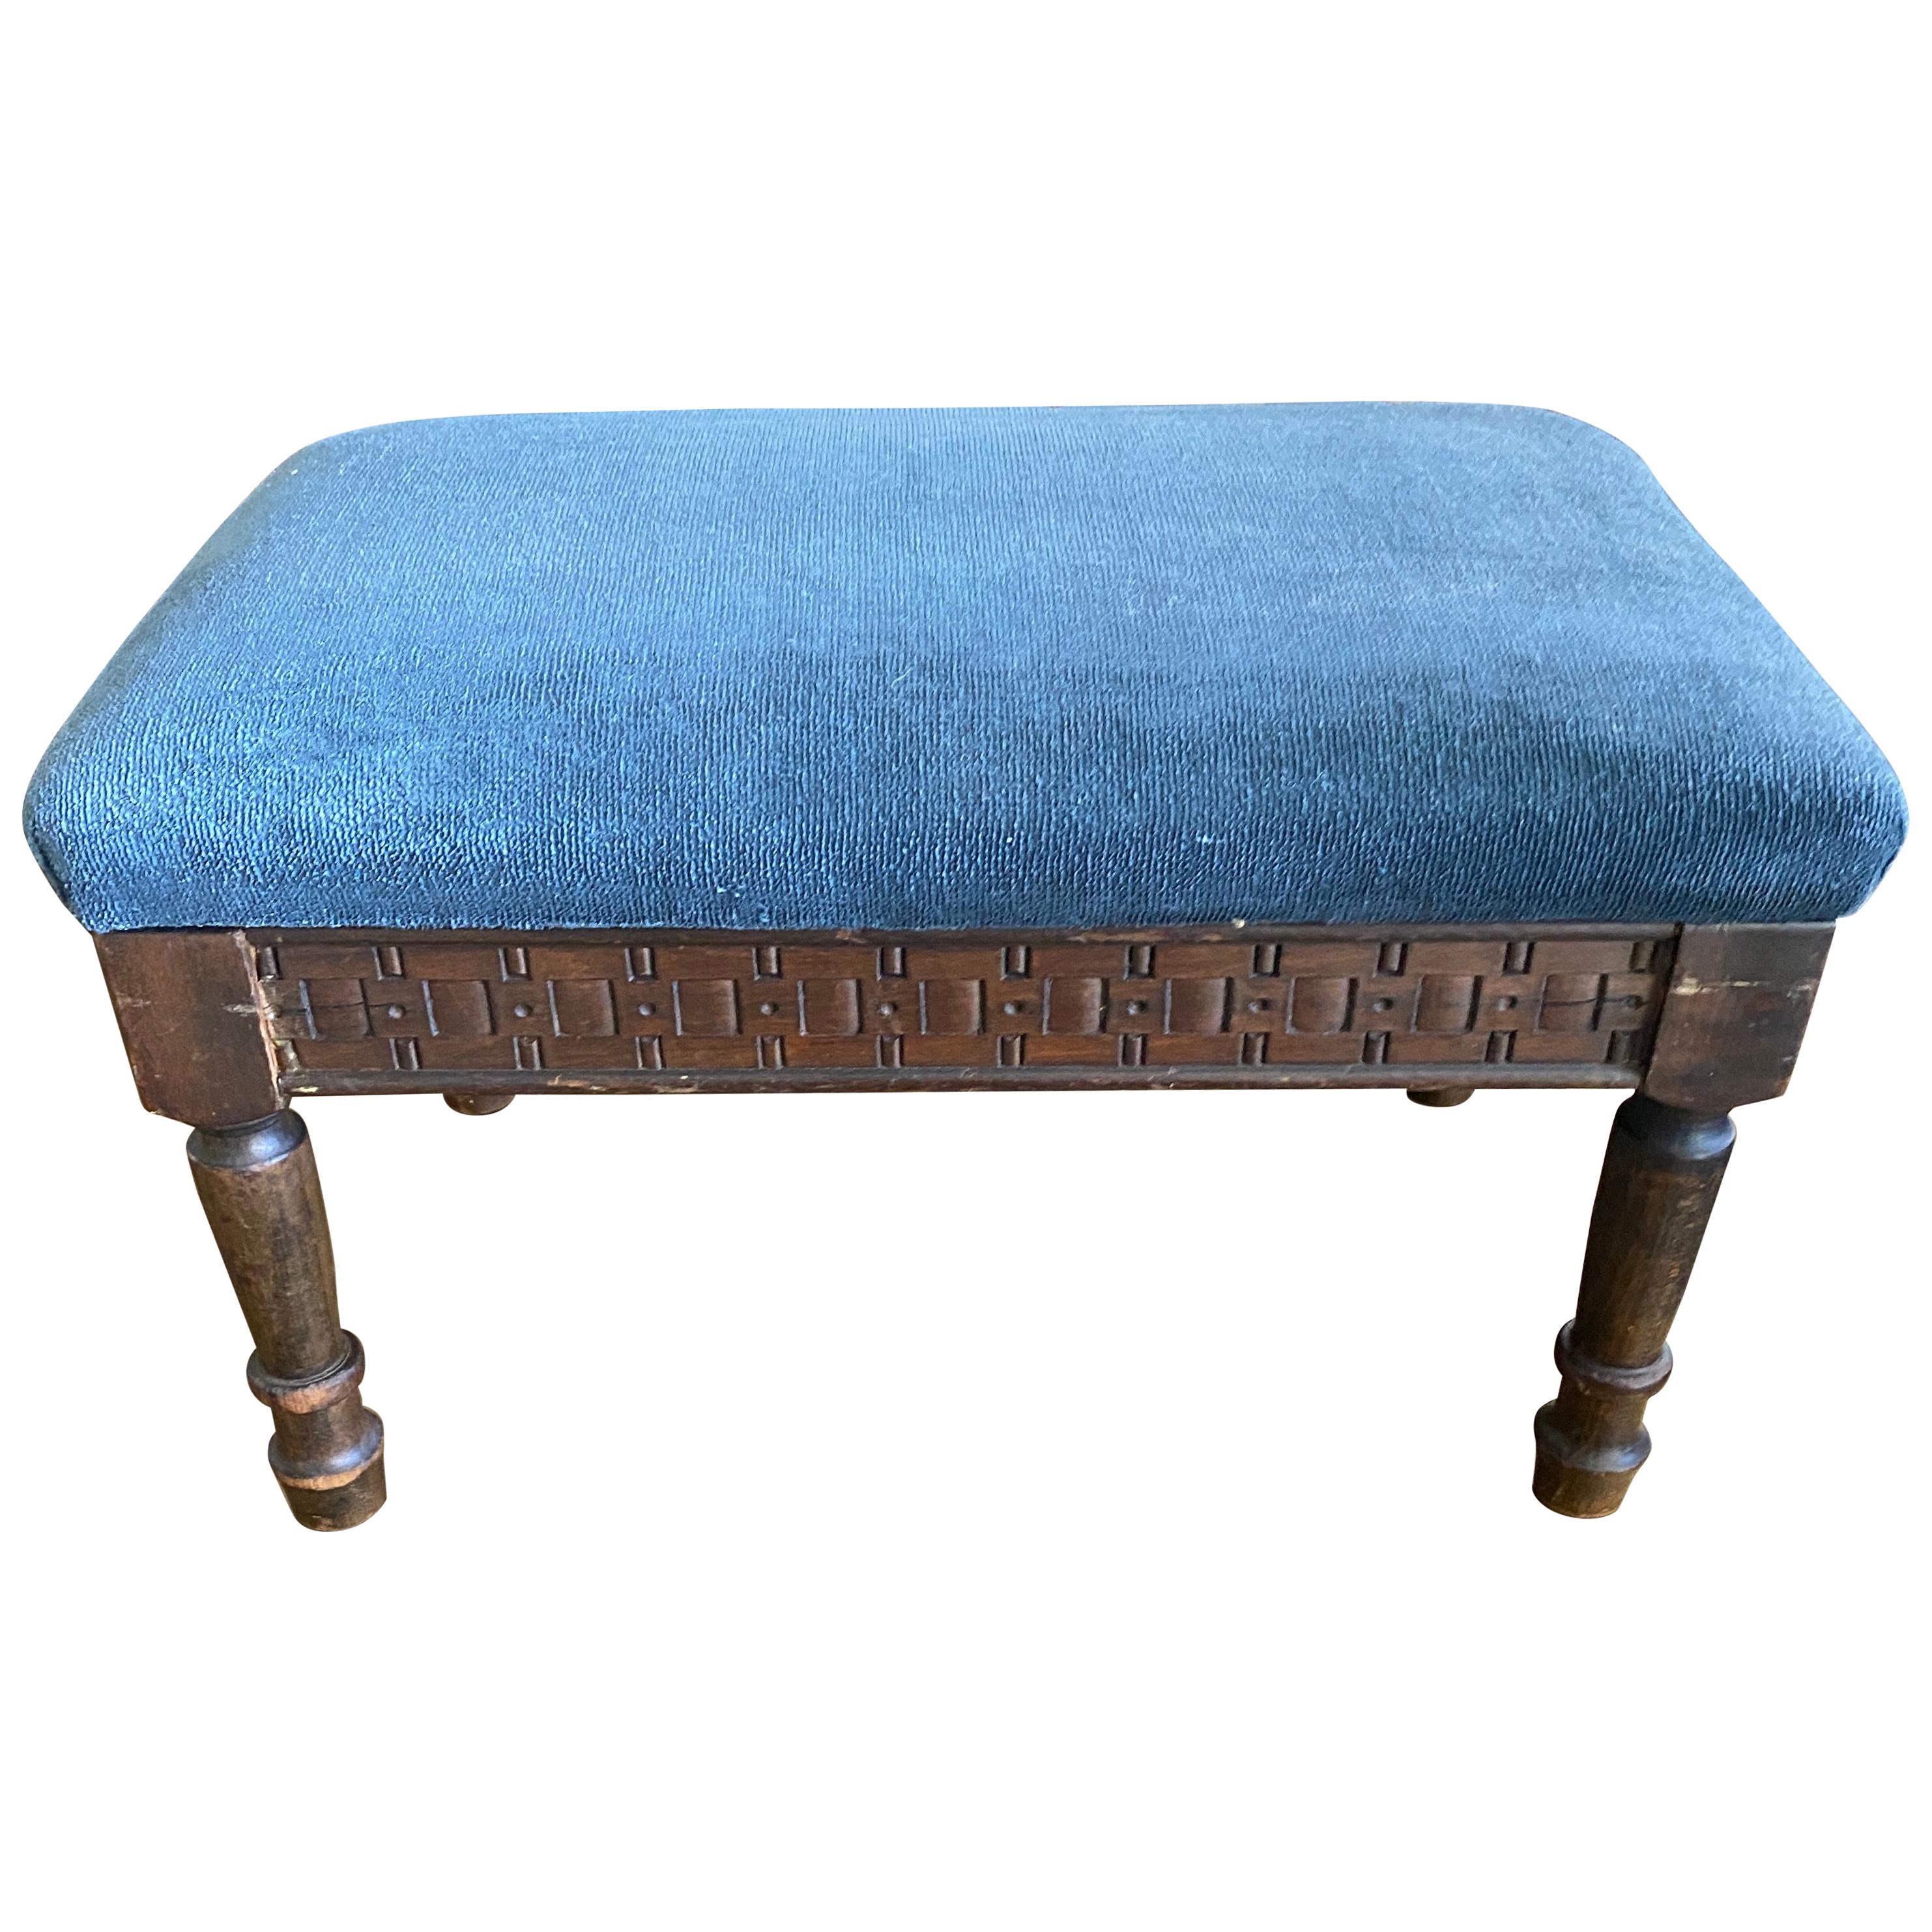 Petite Antique Carved Wood Low Footstool